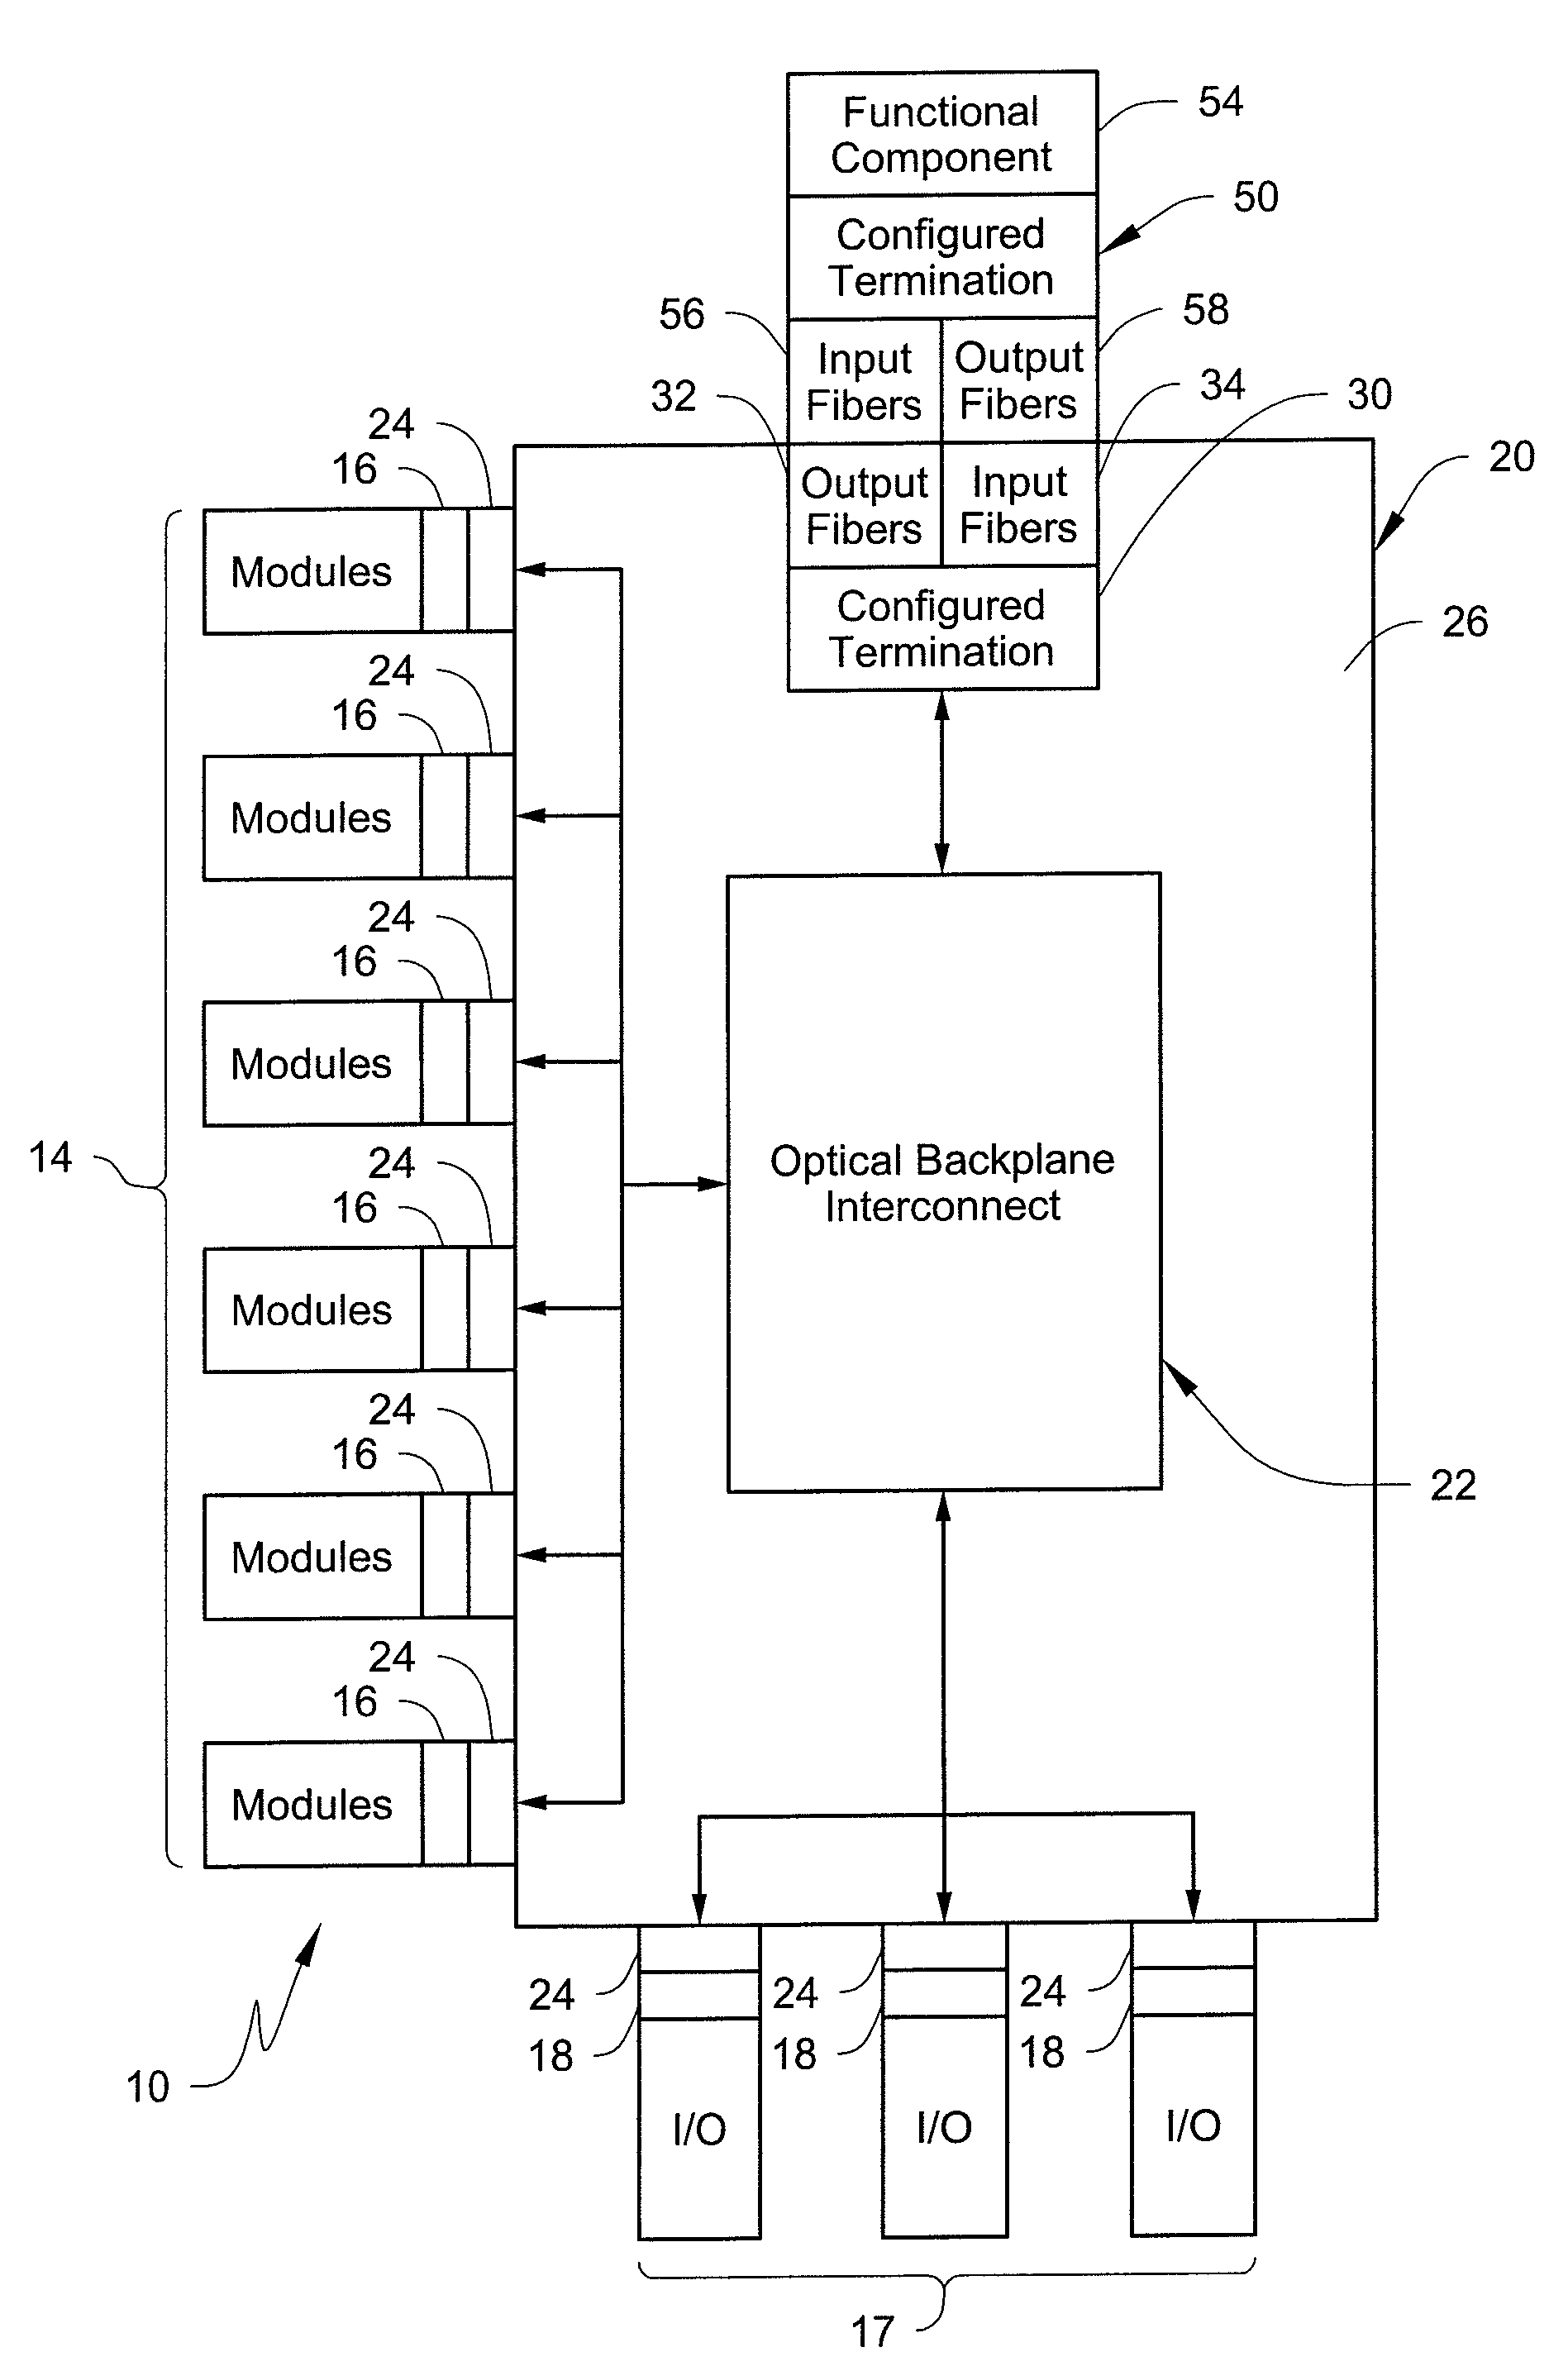 Integrated functionality in optical backplane